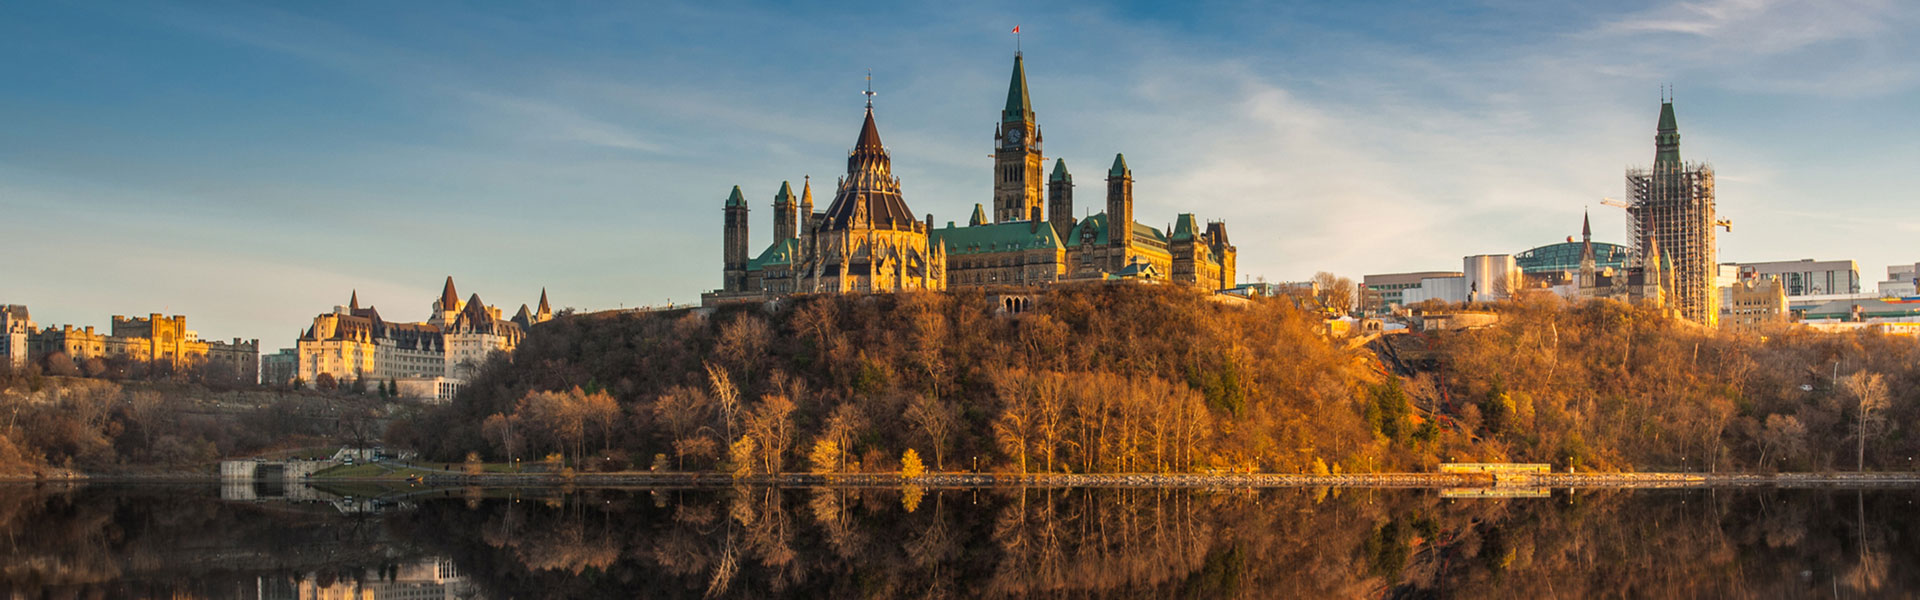 Ottawa Vacation for 2021 | Canada by Design Vacations